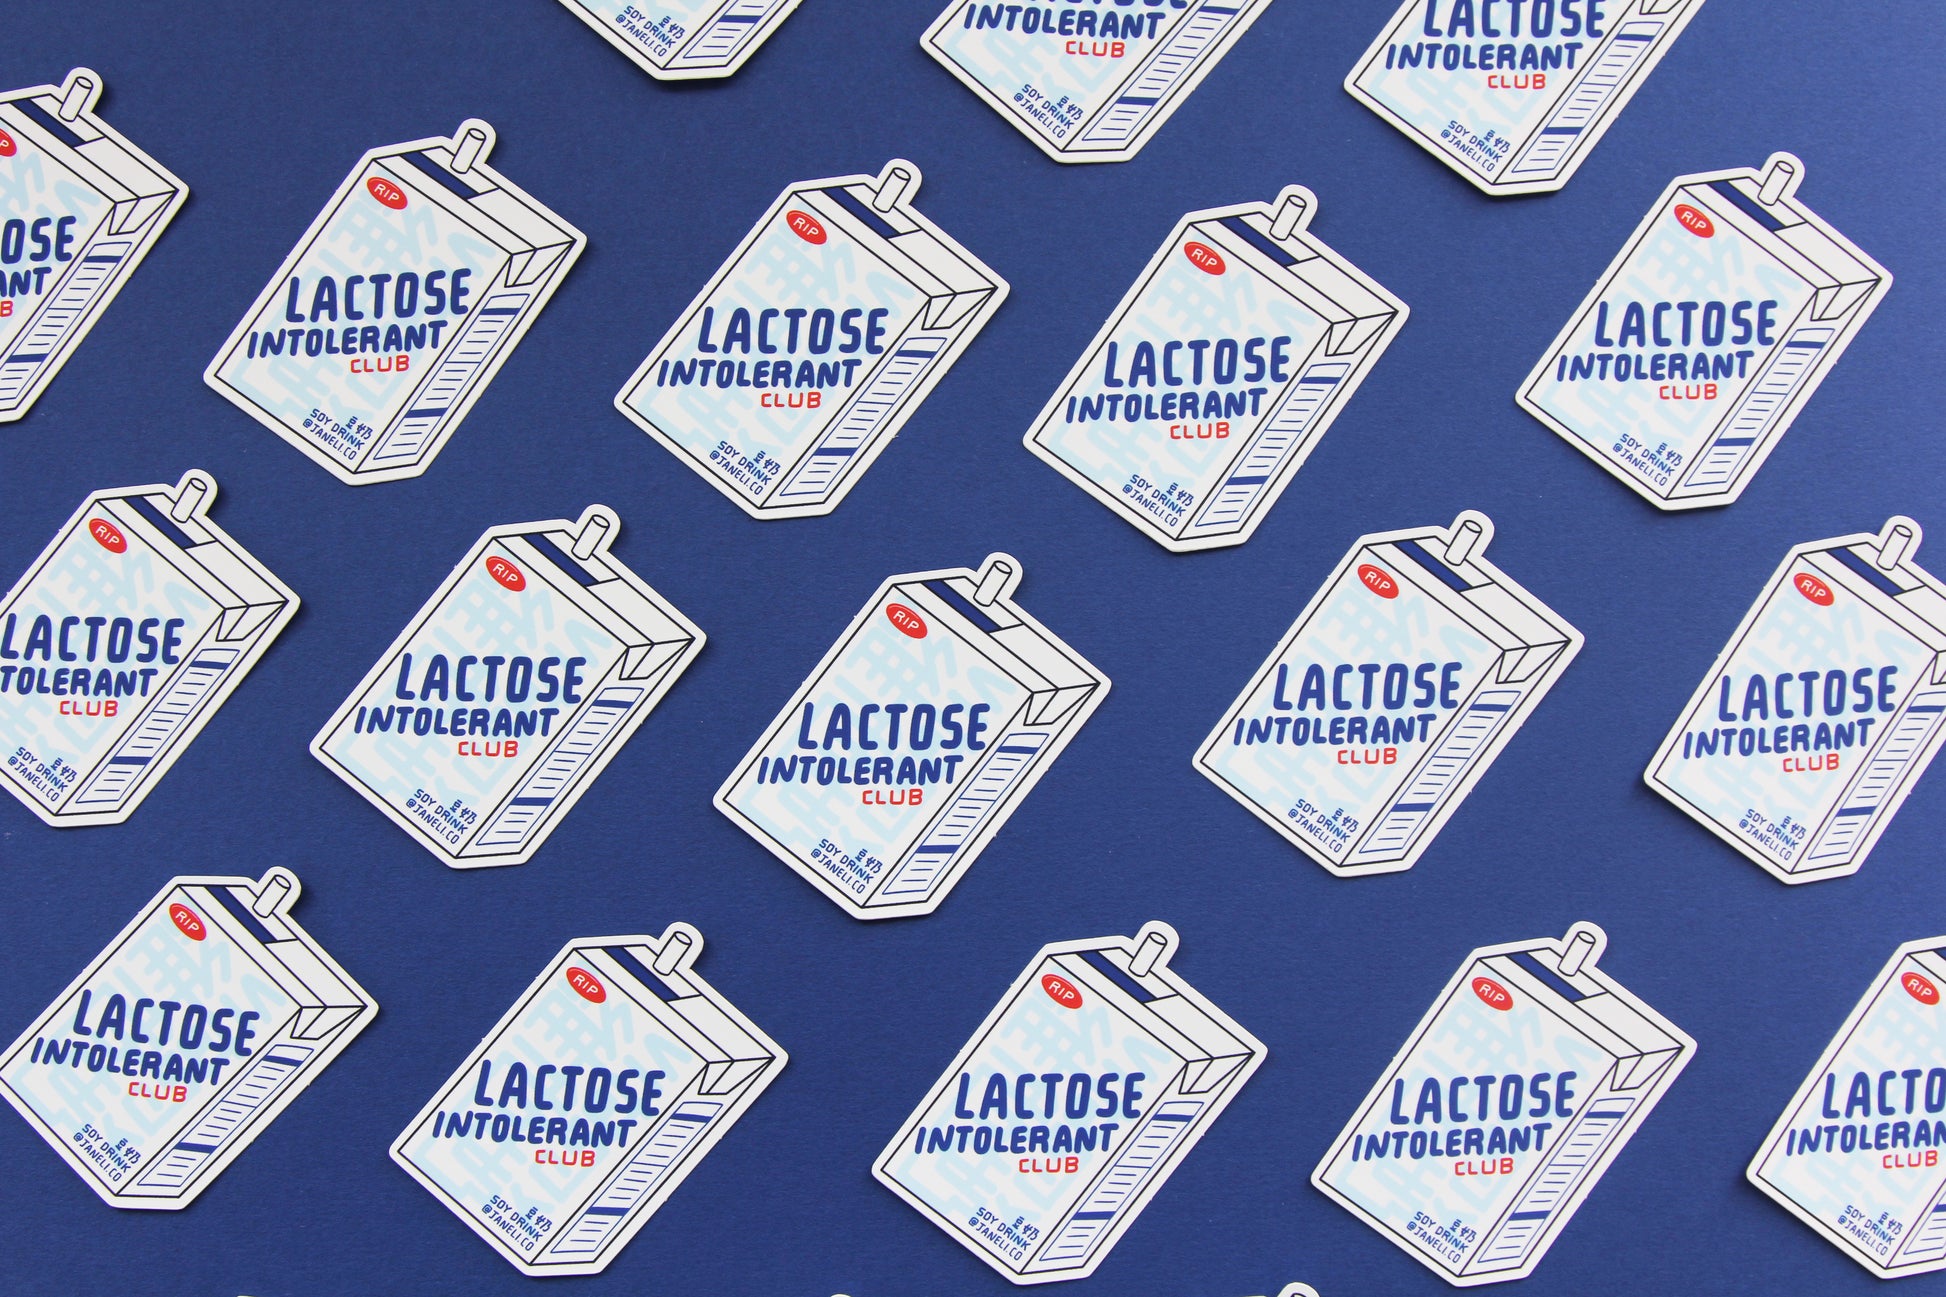 A grid of JaneLi.Co stickers that say "Lactose Intolerant Club" in the shape of soymilk cartons with straws over a navy blue background. 